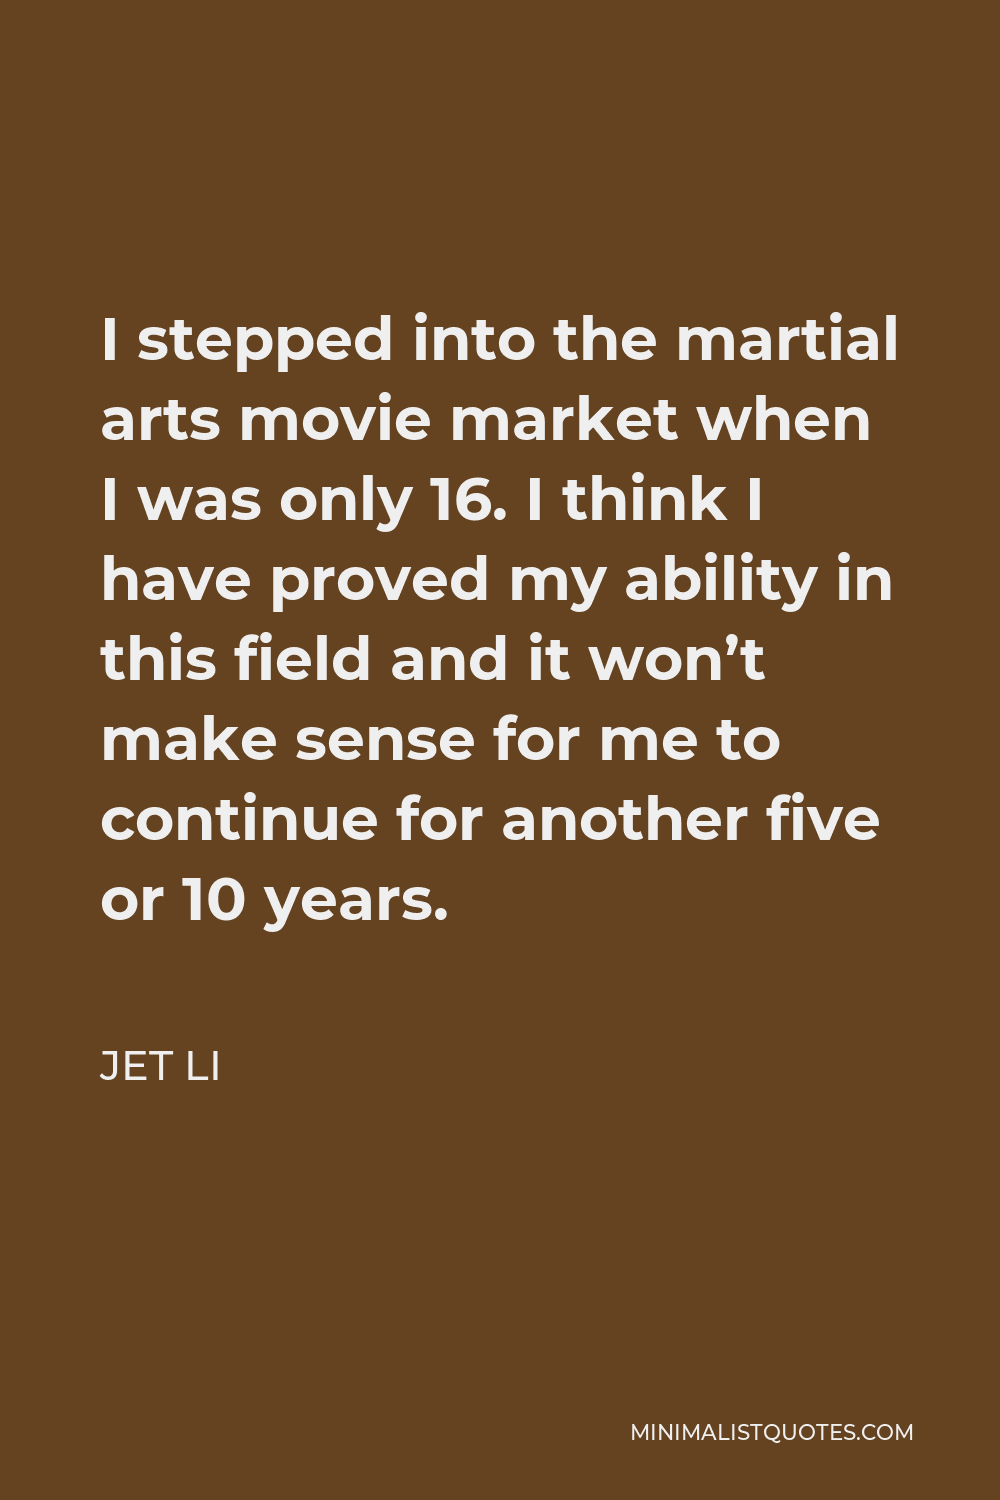 Jet Li Quote - I stepped into the martial arts movie market when I was only 16. I think I have proved my ability in this field and it won’t make sense for me to continue for another five or 10 years.